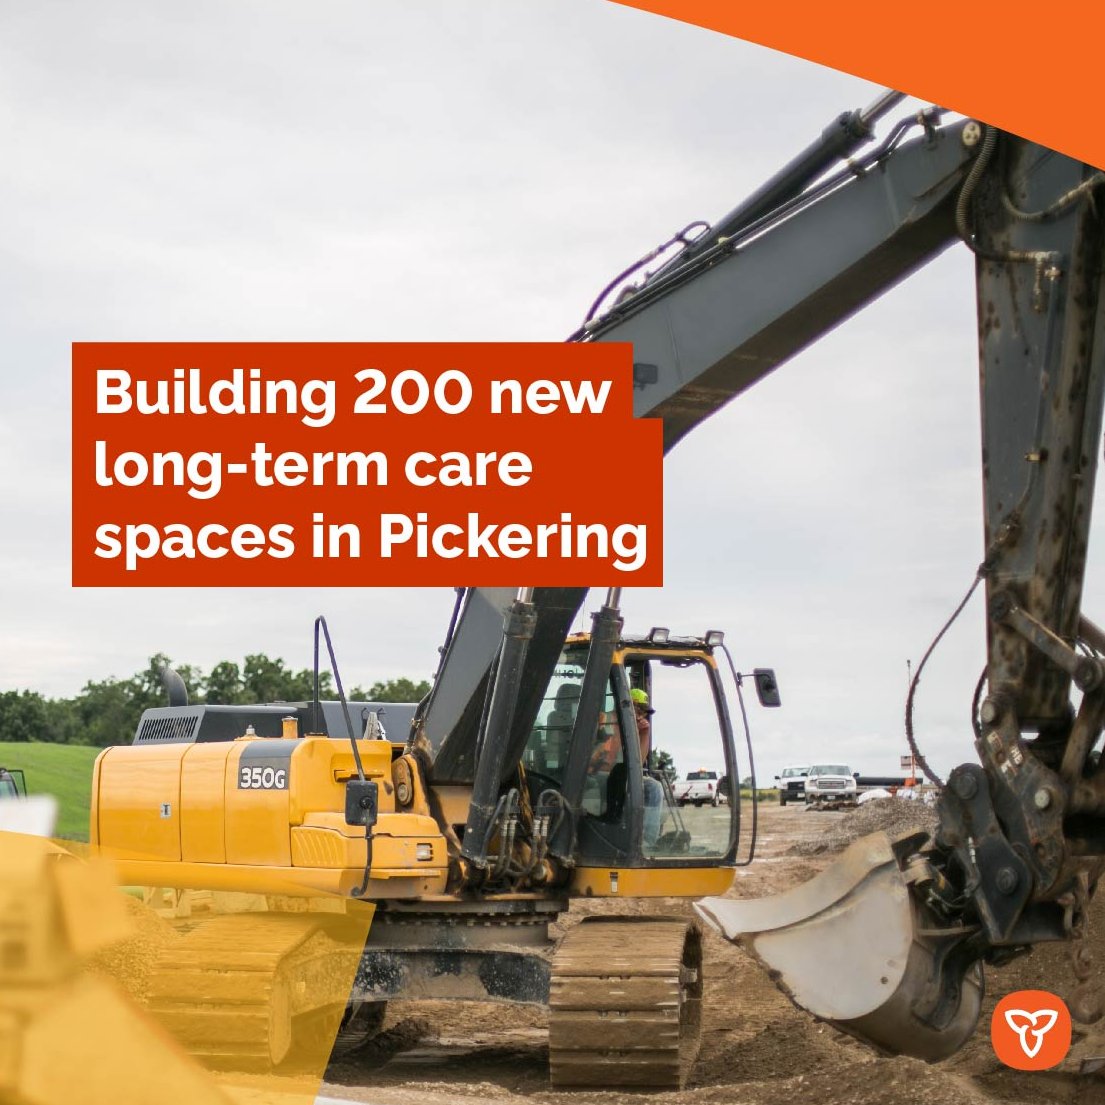 Construction is underway on a brand-new long-term care home in north Pickering! The three-storey home will provide 200 new spaces for local seniors. It’s expected to welcome its first residents in summer 2026. news.ontario.ca/en/release/100…